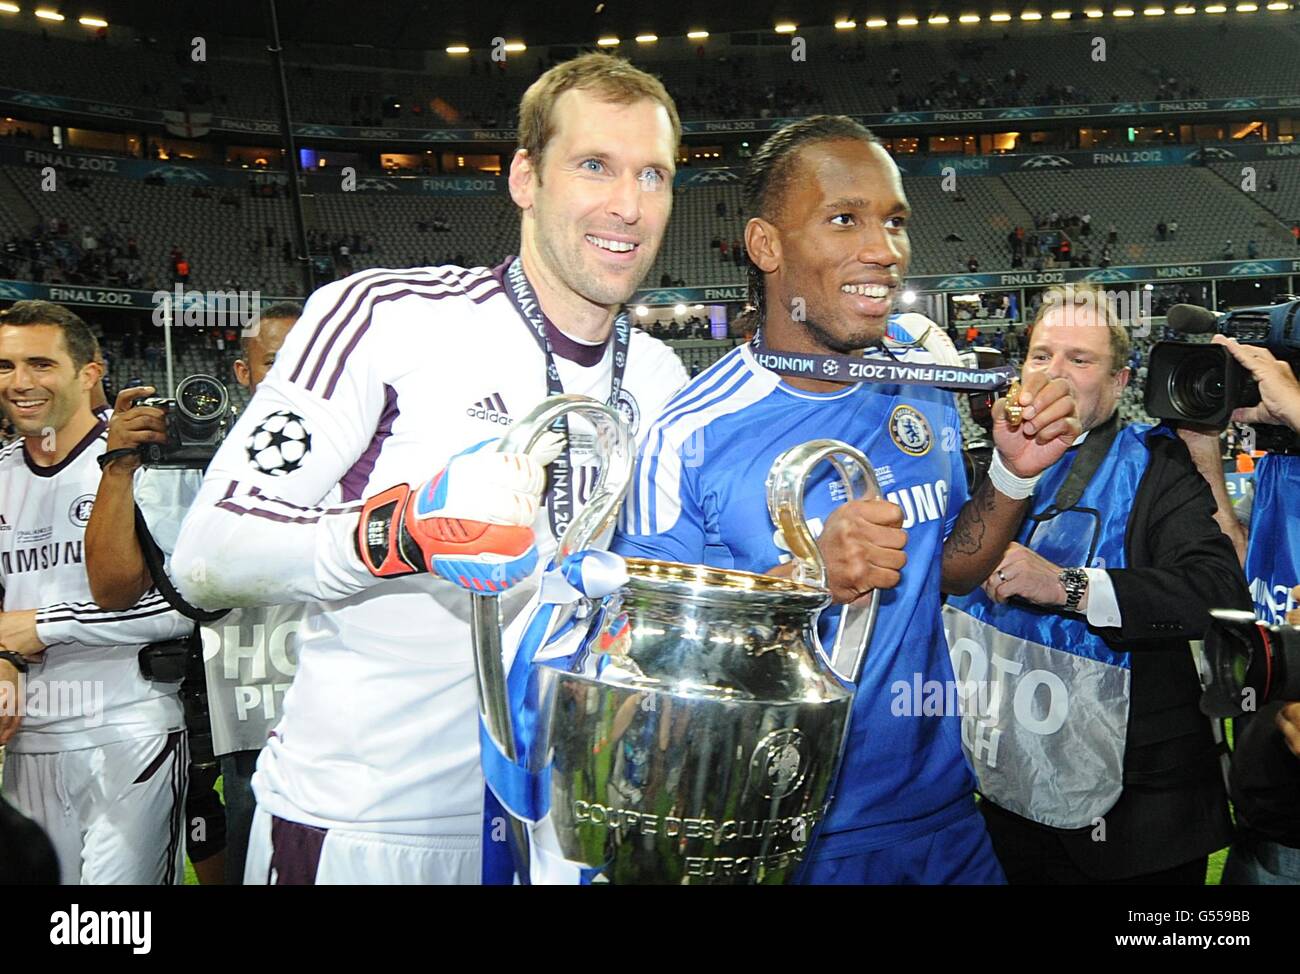 Chelsea's Didier Drogba and Petr Cech (left) celebrate winning the UEFA Champions League, after the final whistle Stock Photo